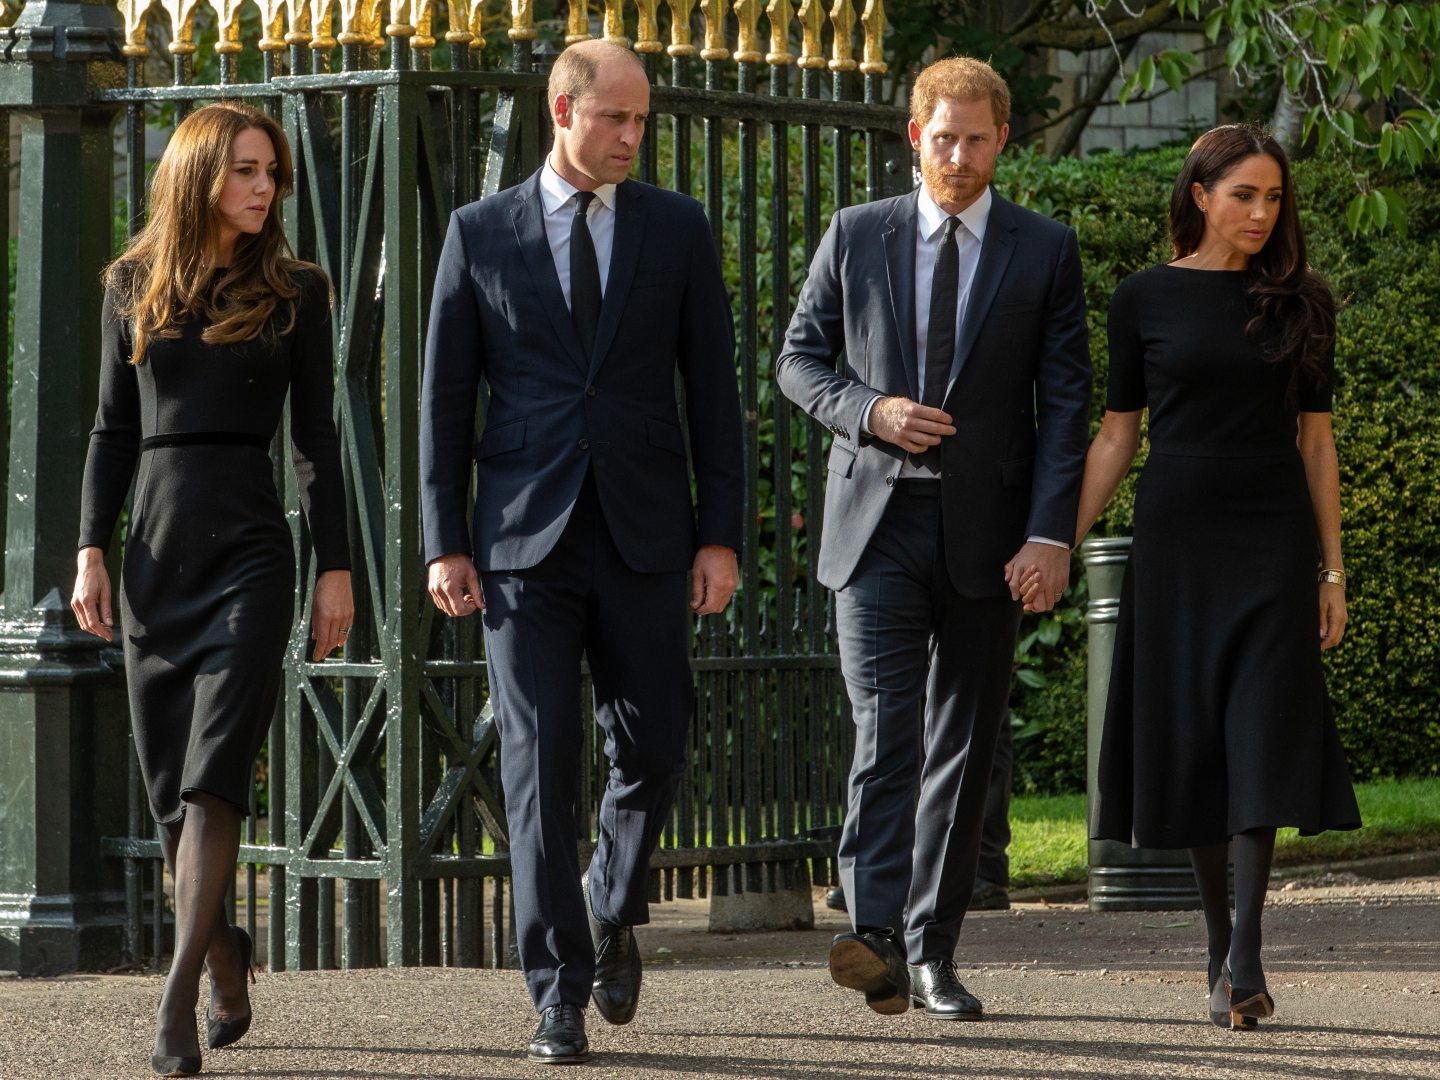 Meghan Markle Reportedly Has ‘Conflicted’ Emotions Over Kate Middleton, per a Royal Biographer